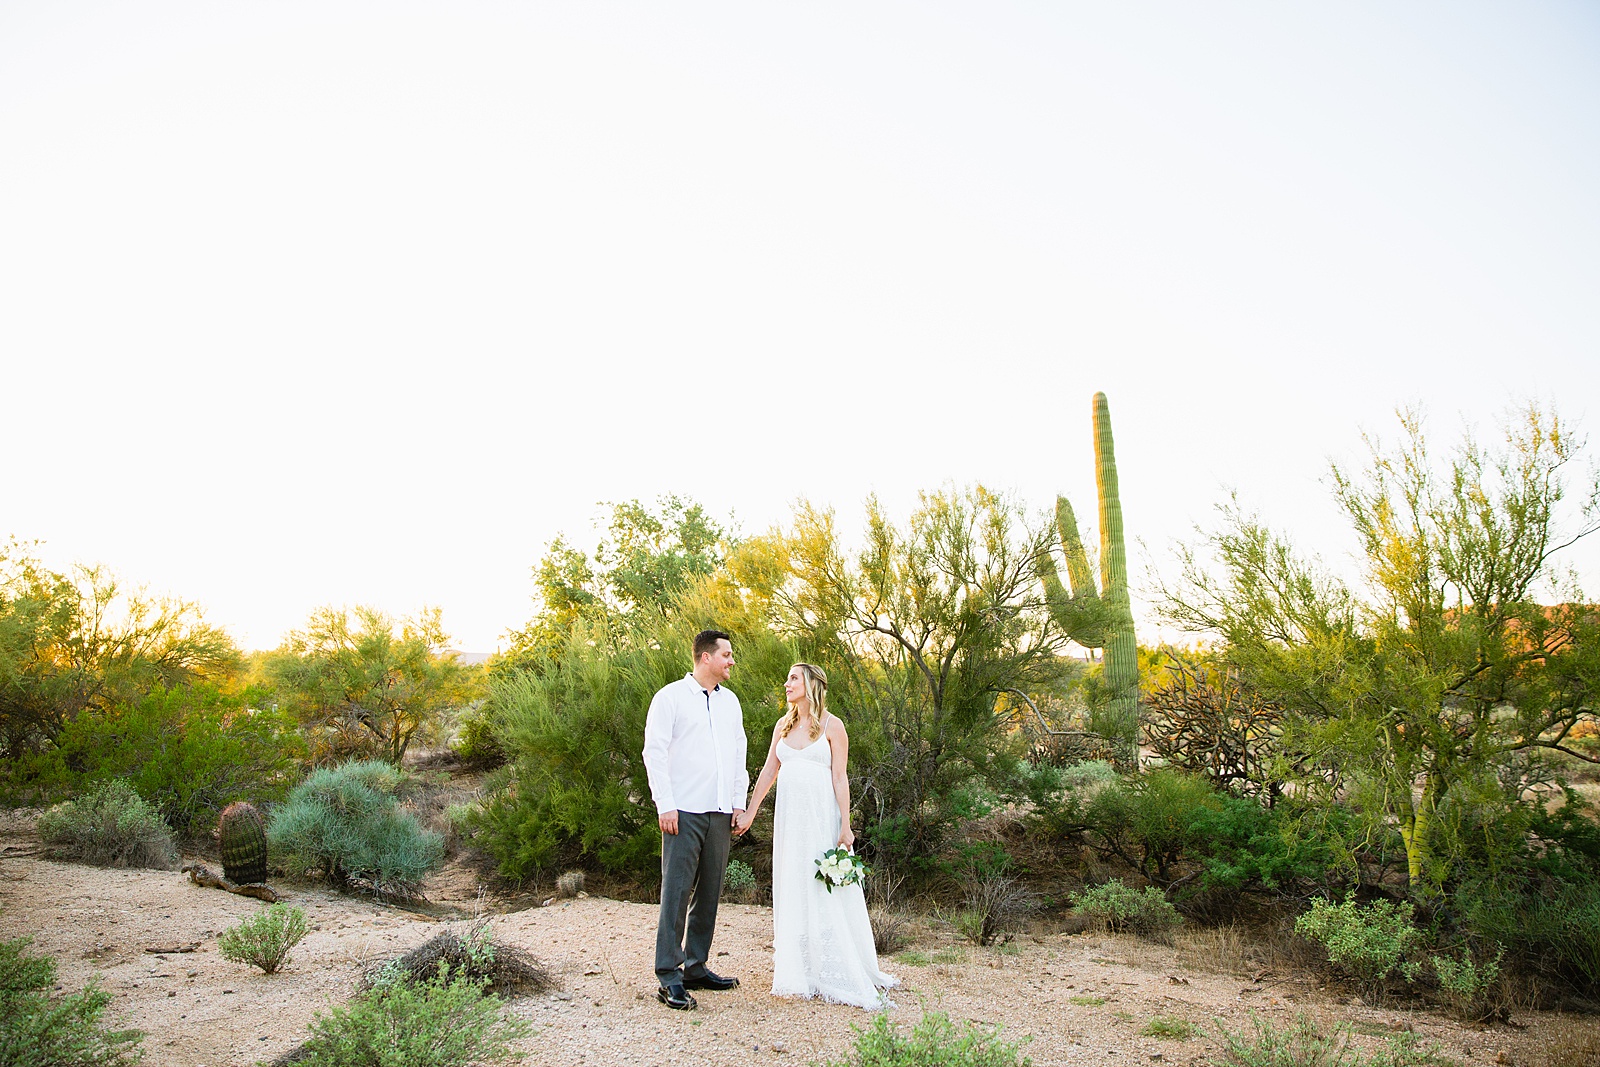 Pregnant bride and Groom pose together during their desert backyard elopement in Scottsdale by Arizona wedding photographer PMA Photography.